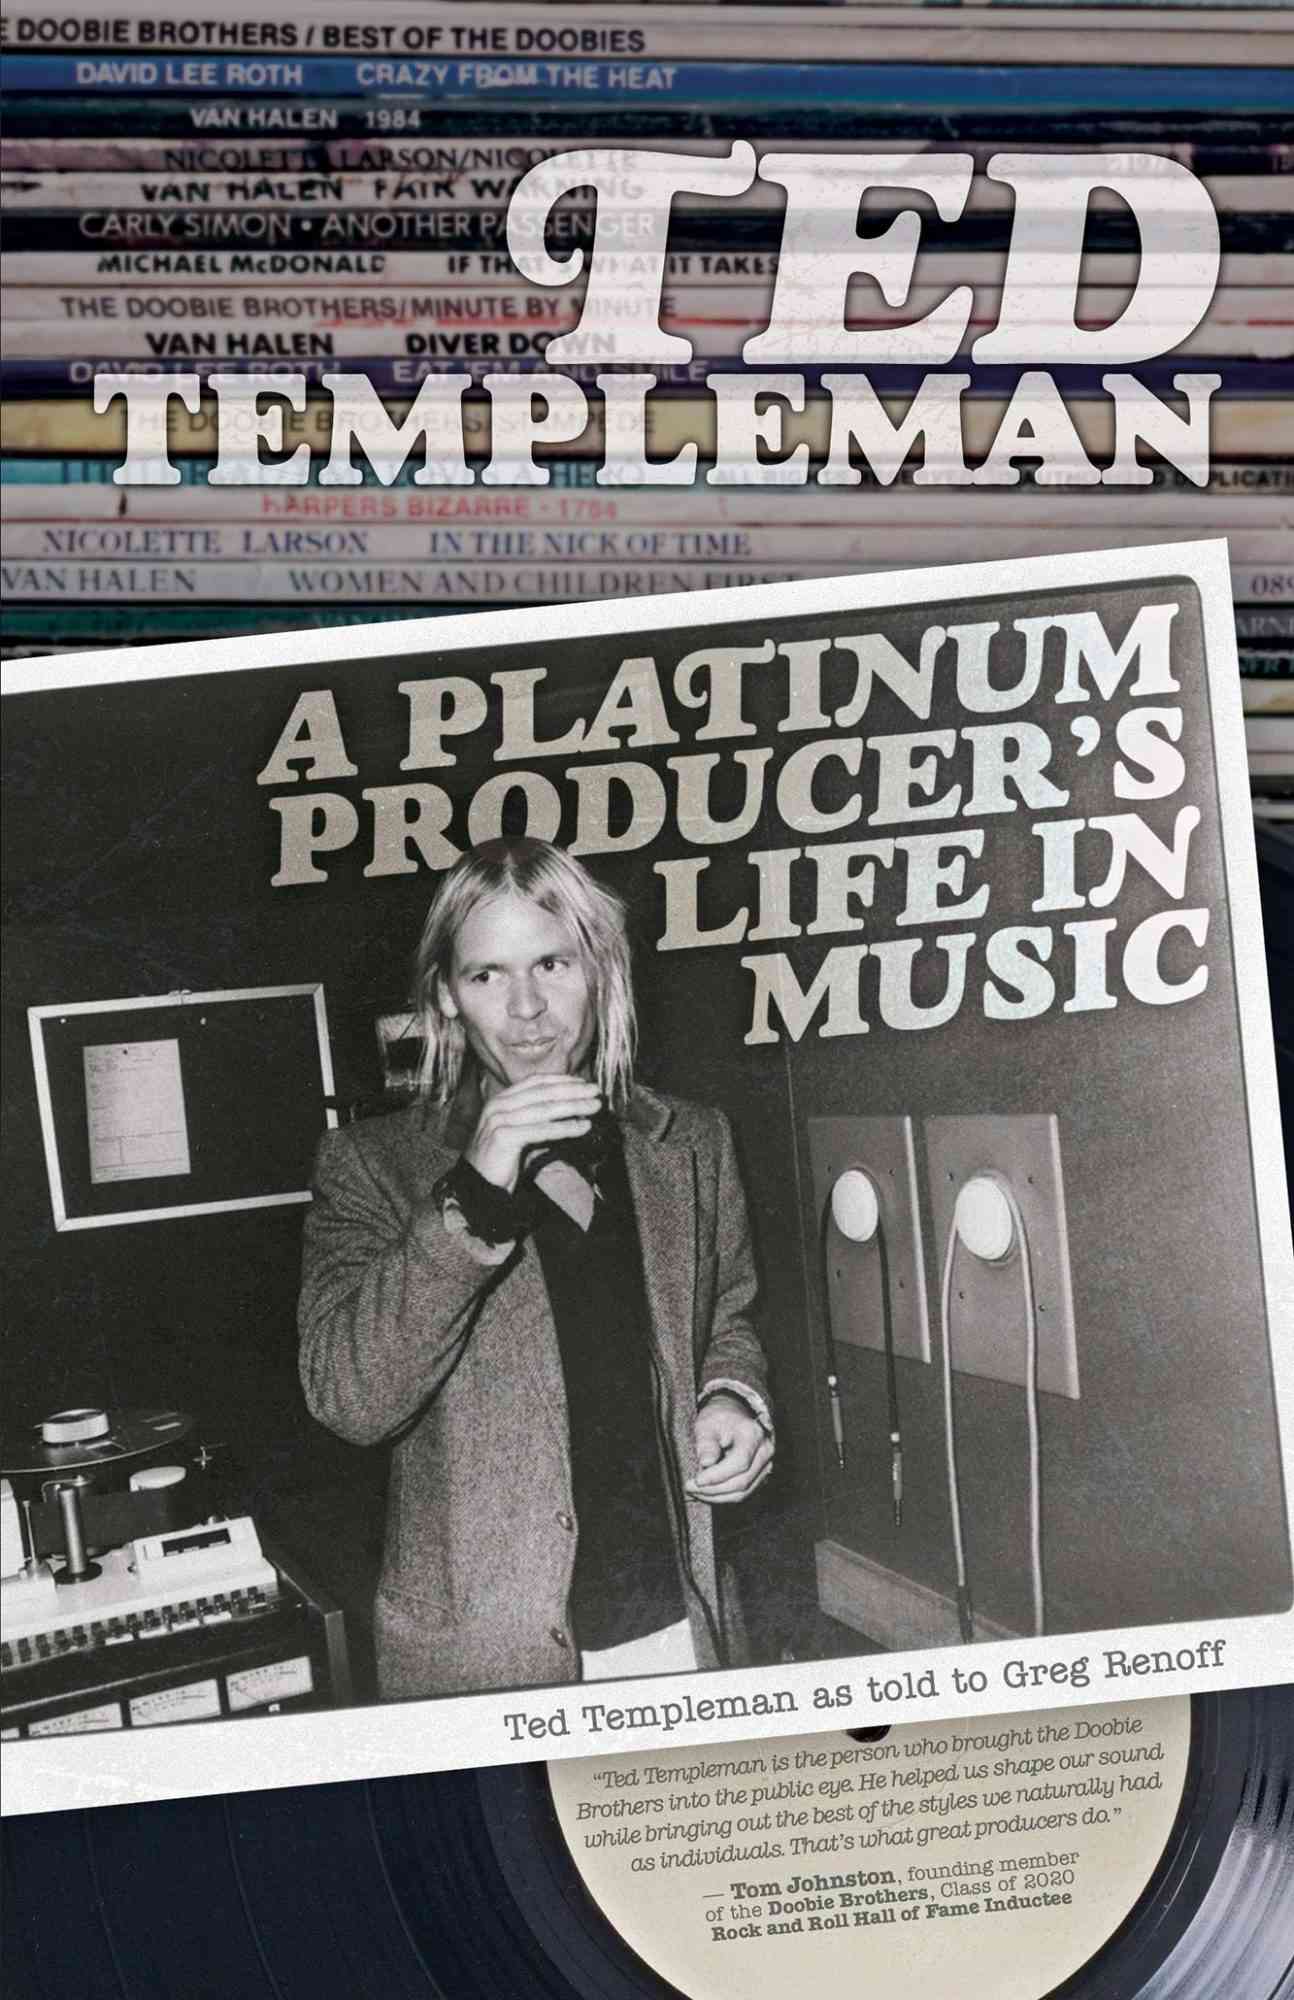 Ted Templeman, A Platinum Producer's Life in Music